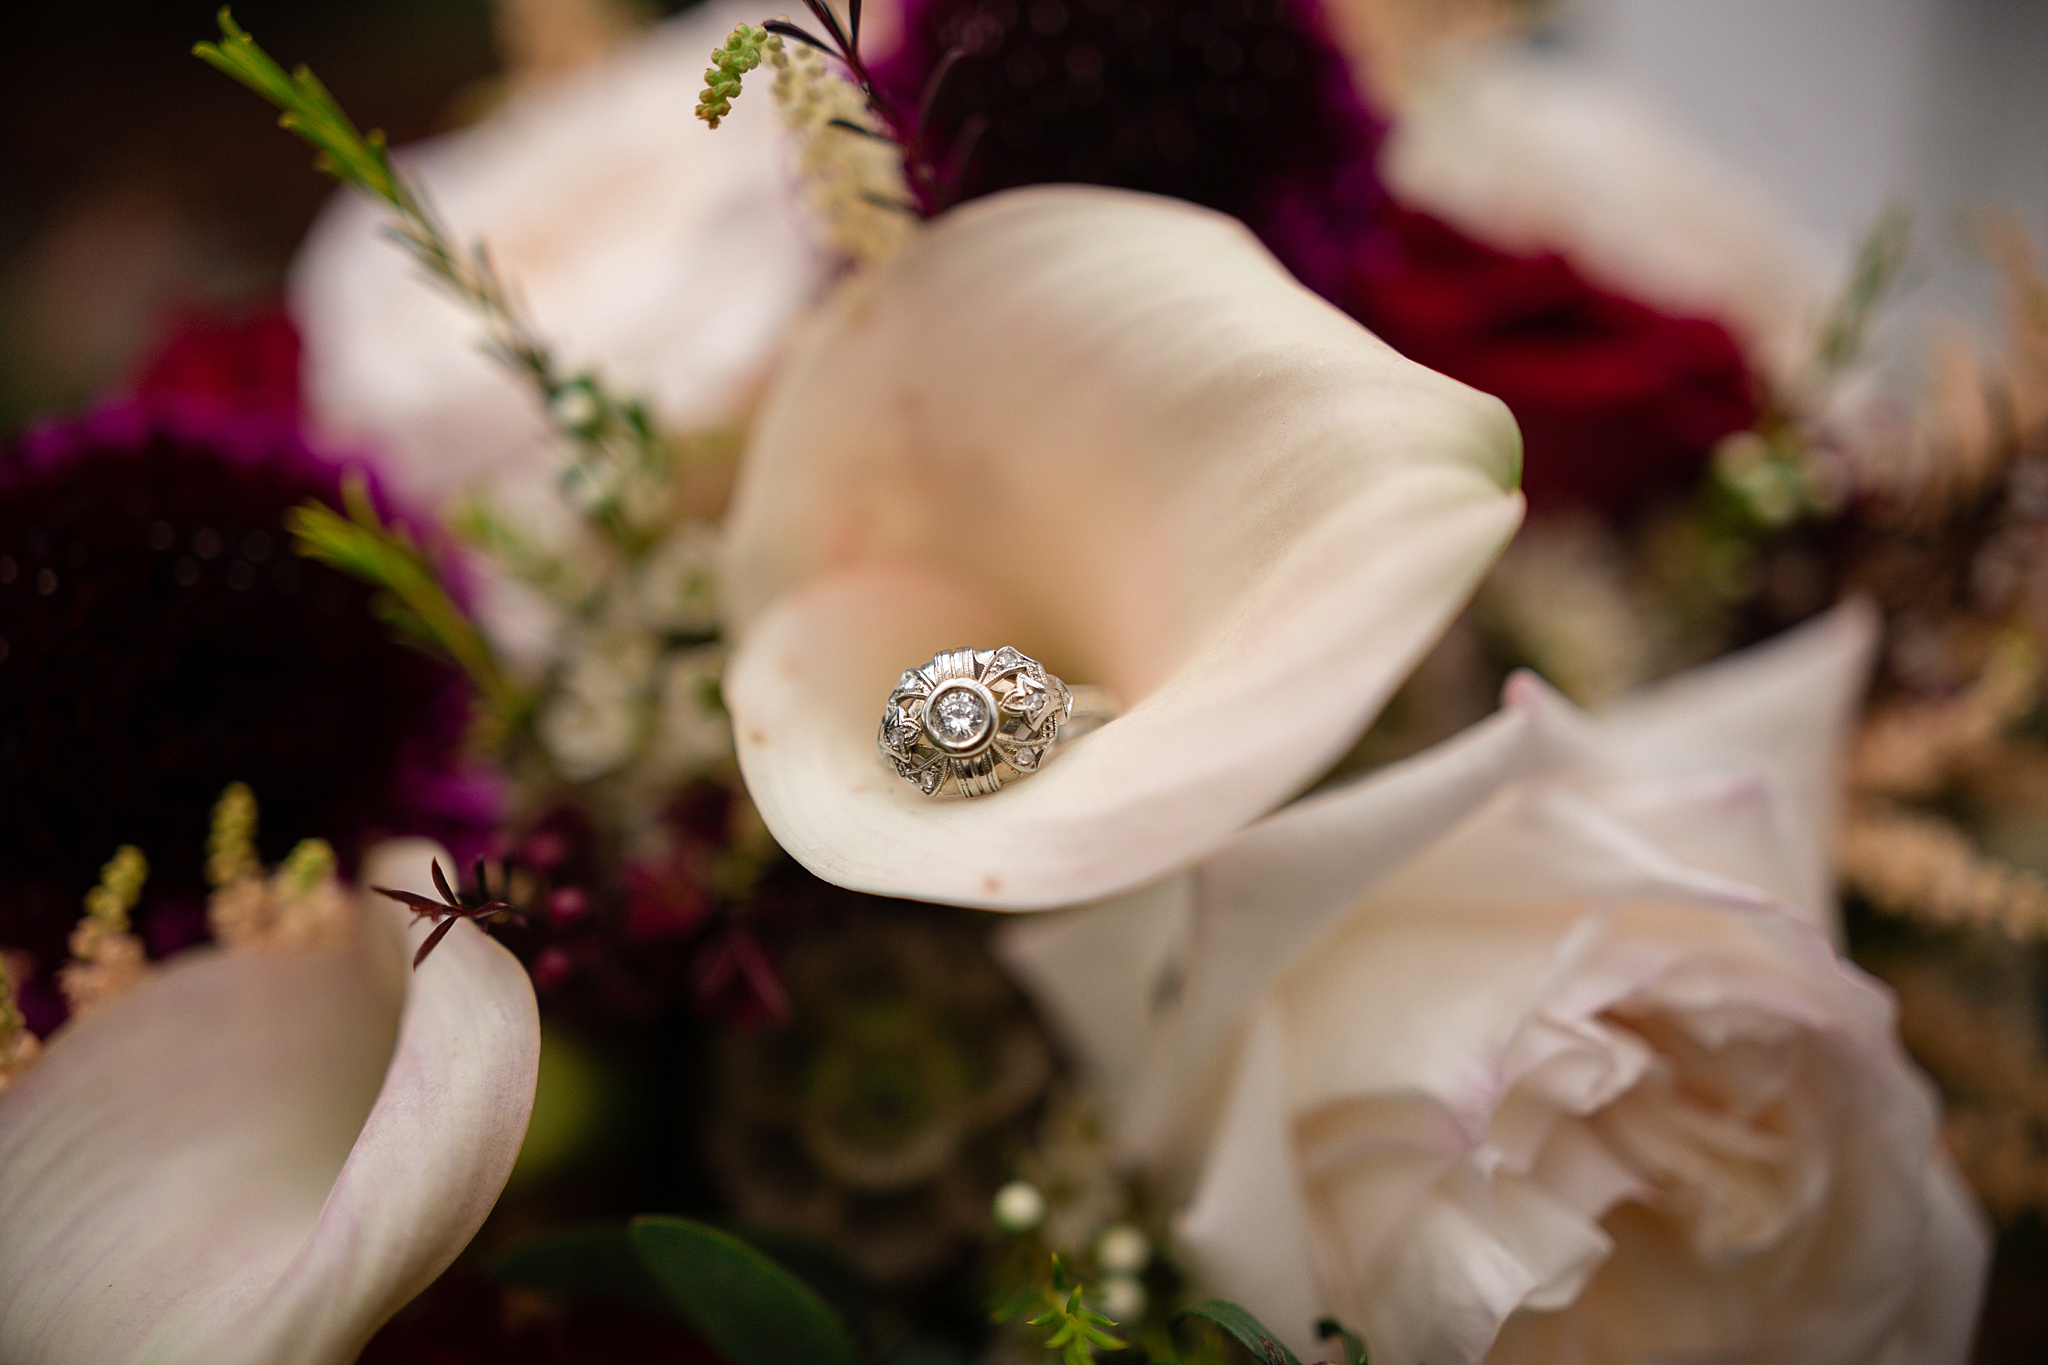 Close-up photo of wedding ring in the bridal bouquet. Tania & Chris' Denver Wedding at the Wedgewood Ken Caryl by Colorado Wedding Photography, Jennifer Garza. Colorado Wedding Photographer, Colorado Wedding Photography, Denver Wedding Photographer, Denver Wedding Photography, US Marine Corp Wedding, US Marine Corp, Military Wedding, US Marines, Wedgewood Weddings, Wedgewood Weddings Ken Caryl, Colorado Wedding, Denver Wedding, Wedding Photographer, Colorado Bride, Brides of Colorado